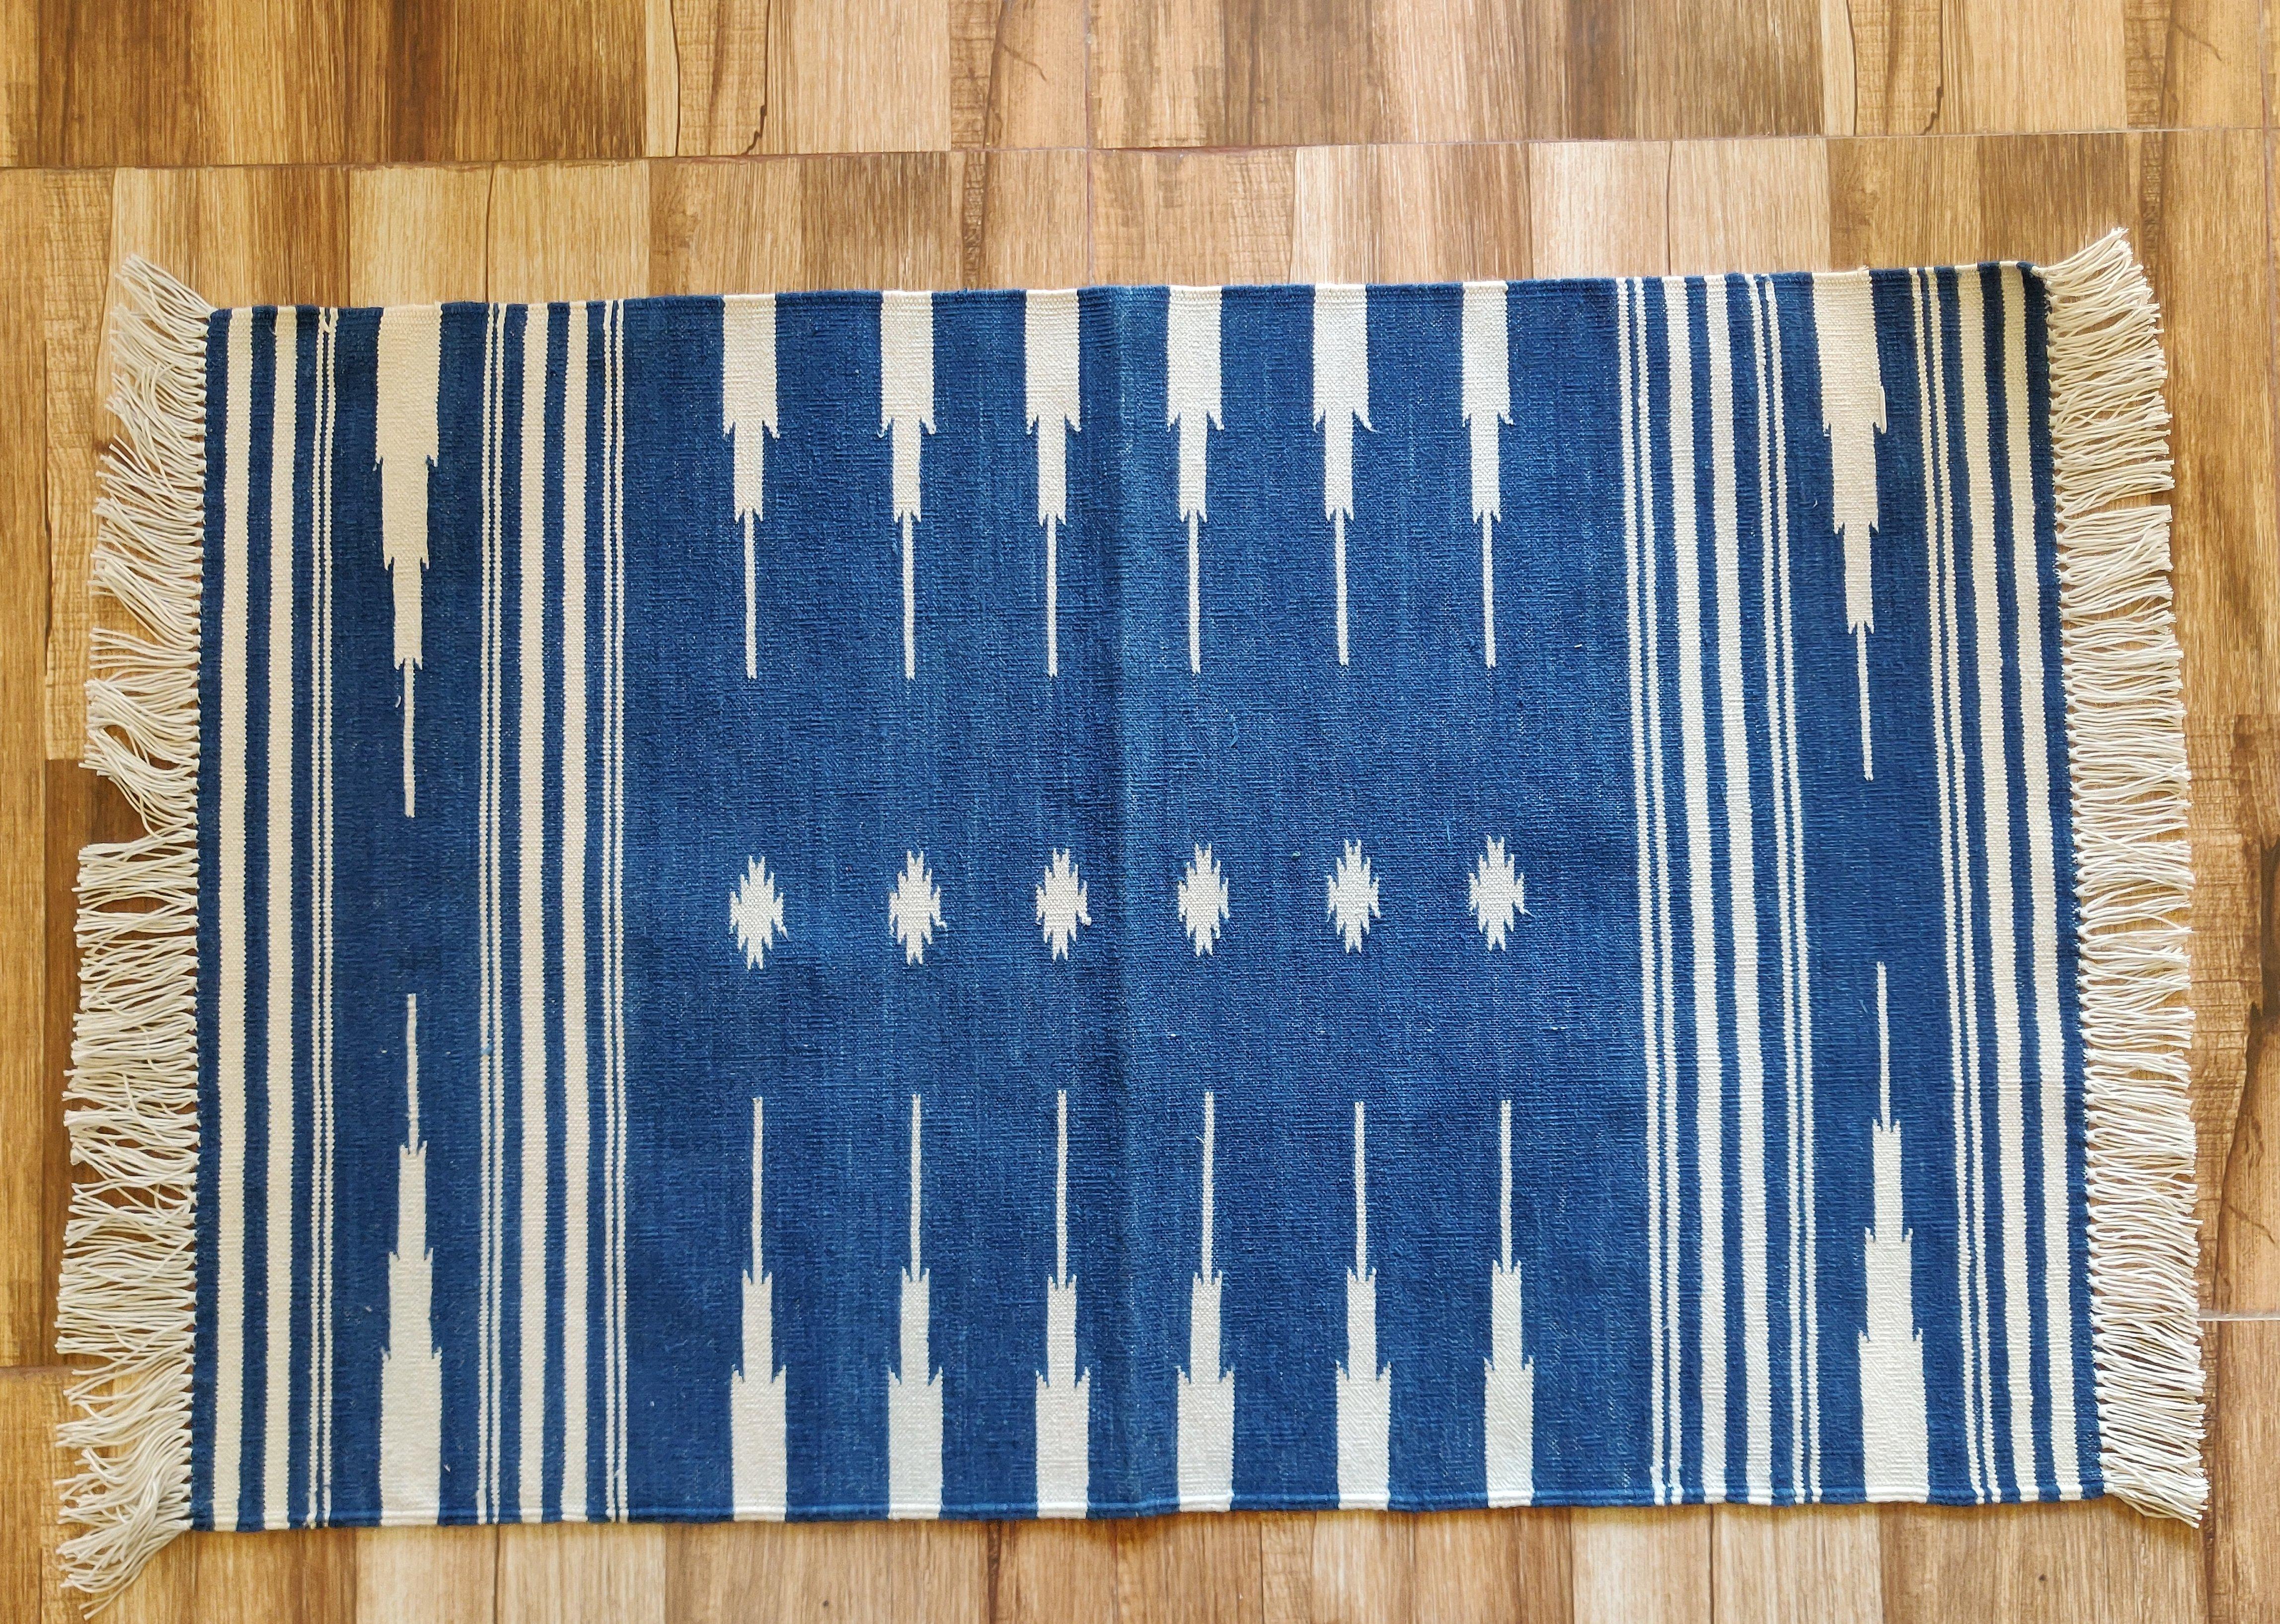 Handmade Cotton Area Flat Weave Rug, 2x3 Blue And White Striped Indian Dhurrie In New Condition For Sale In Jaipur, IN